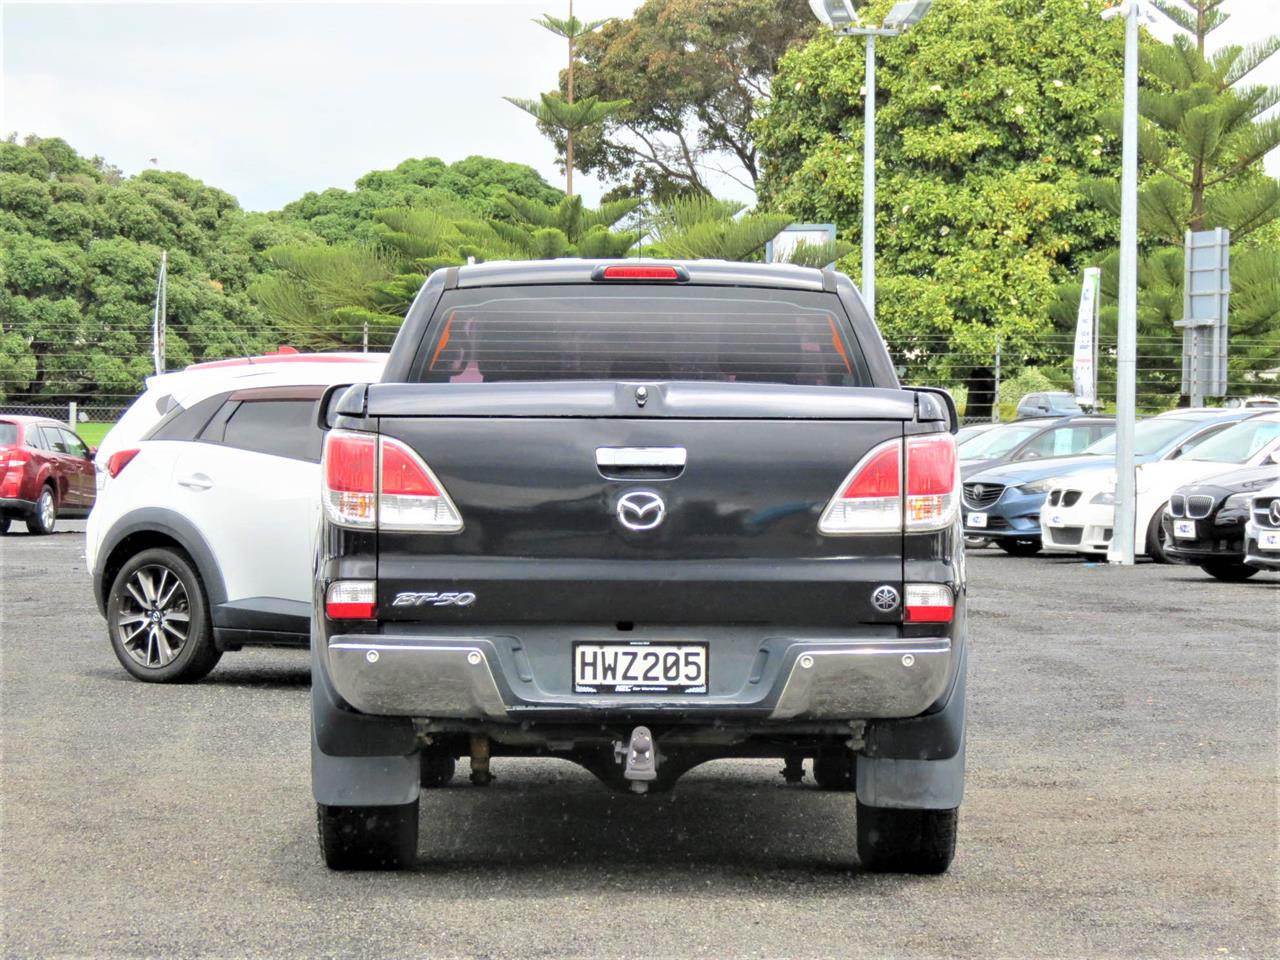 2015 Mazda BT-50 only $66 weekly